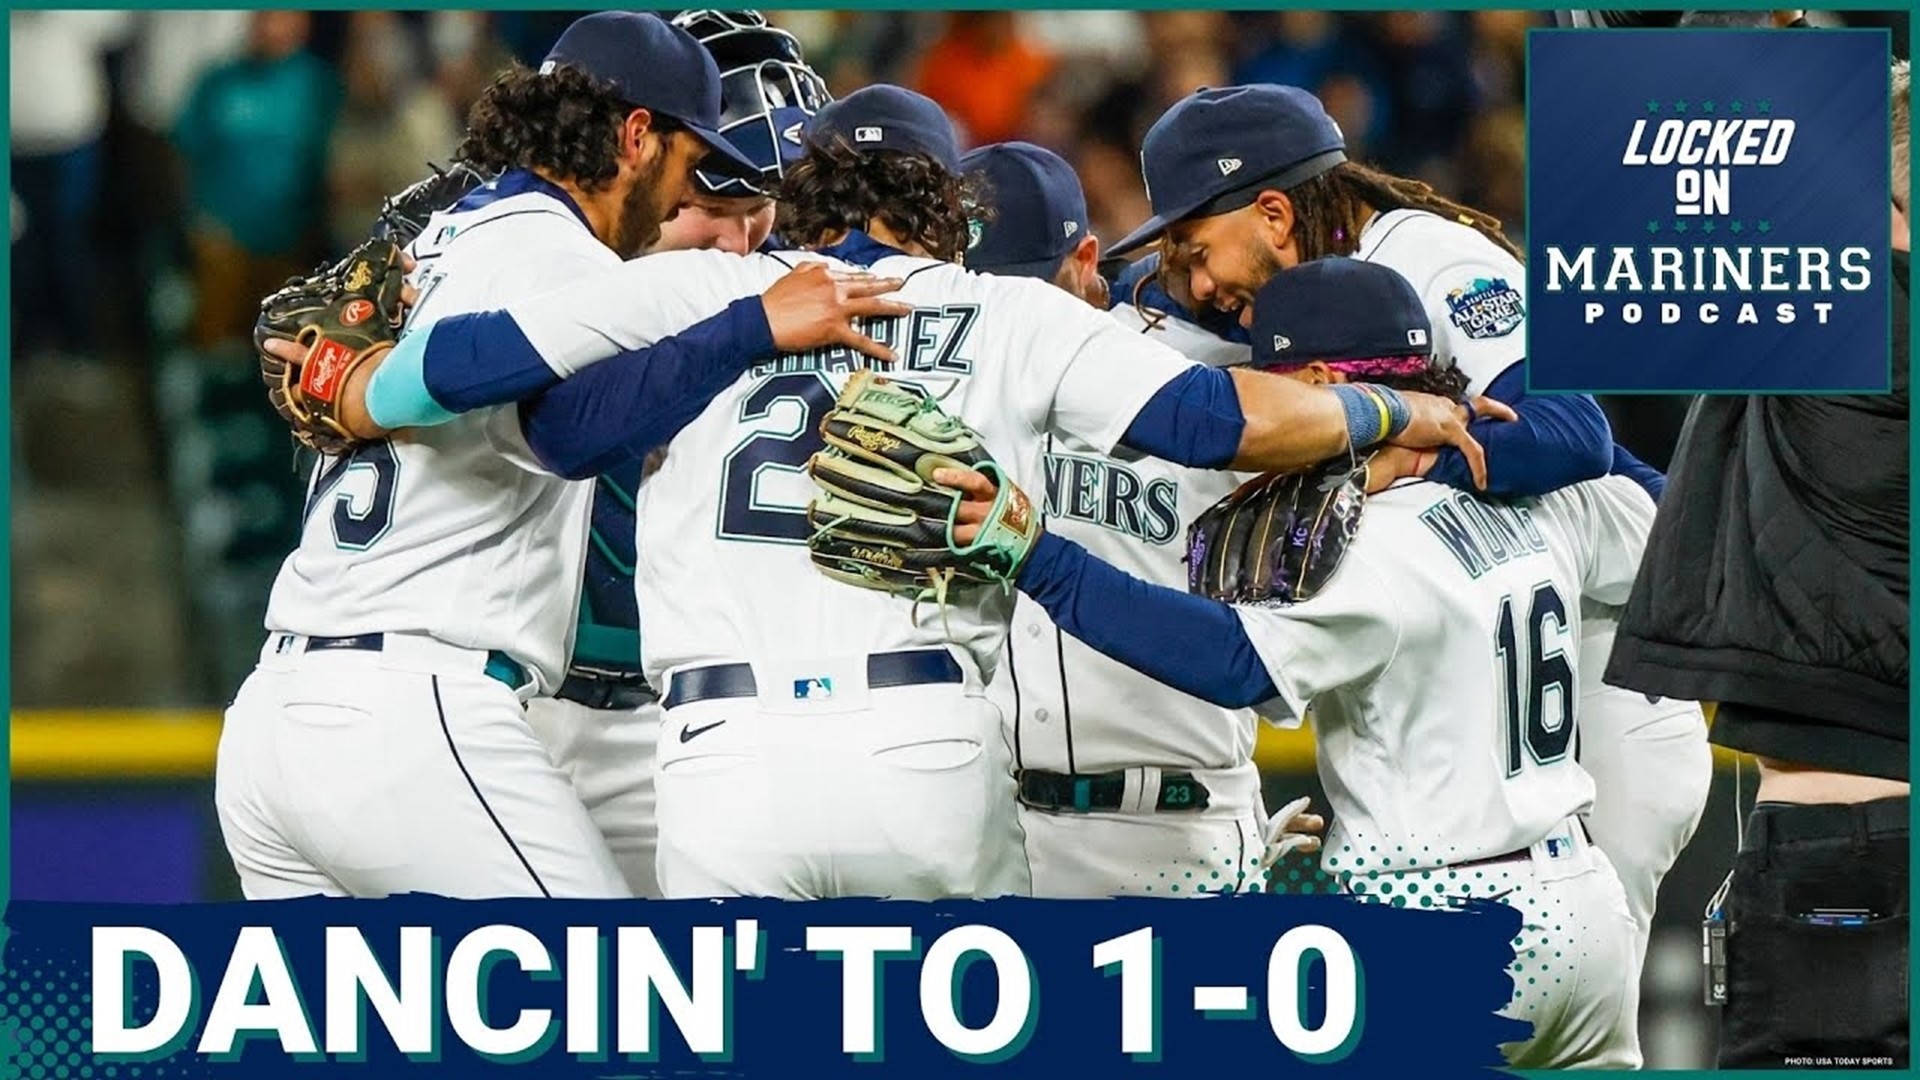 That's Seattle Mariners Baseball baby! In a formula that was all too familiar, Seattle used dominant pitching and timely hitting to win yet another Opening Day game.